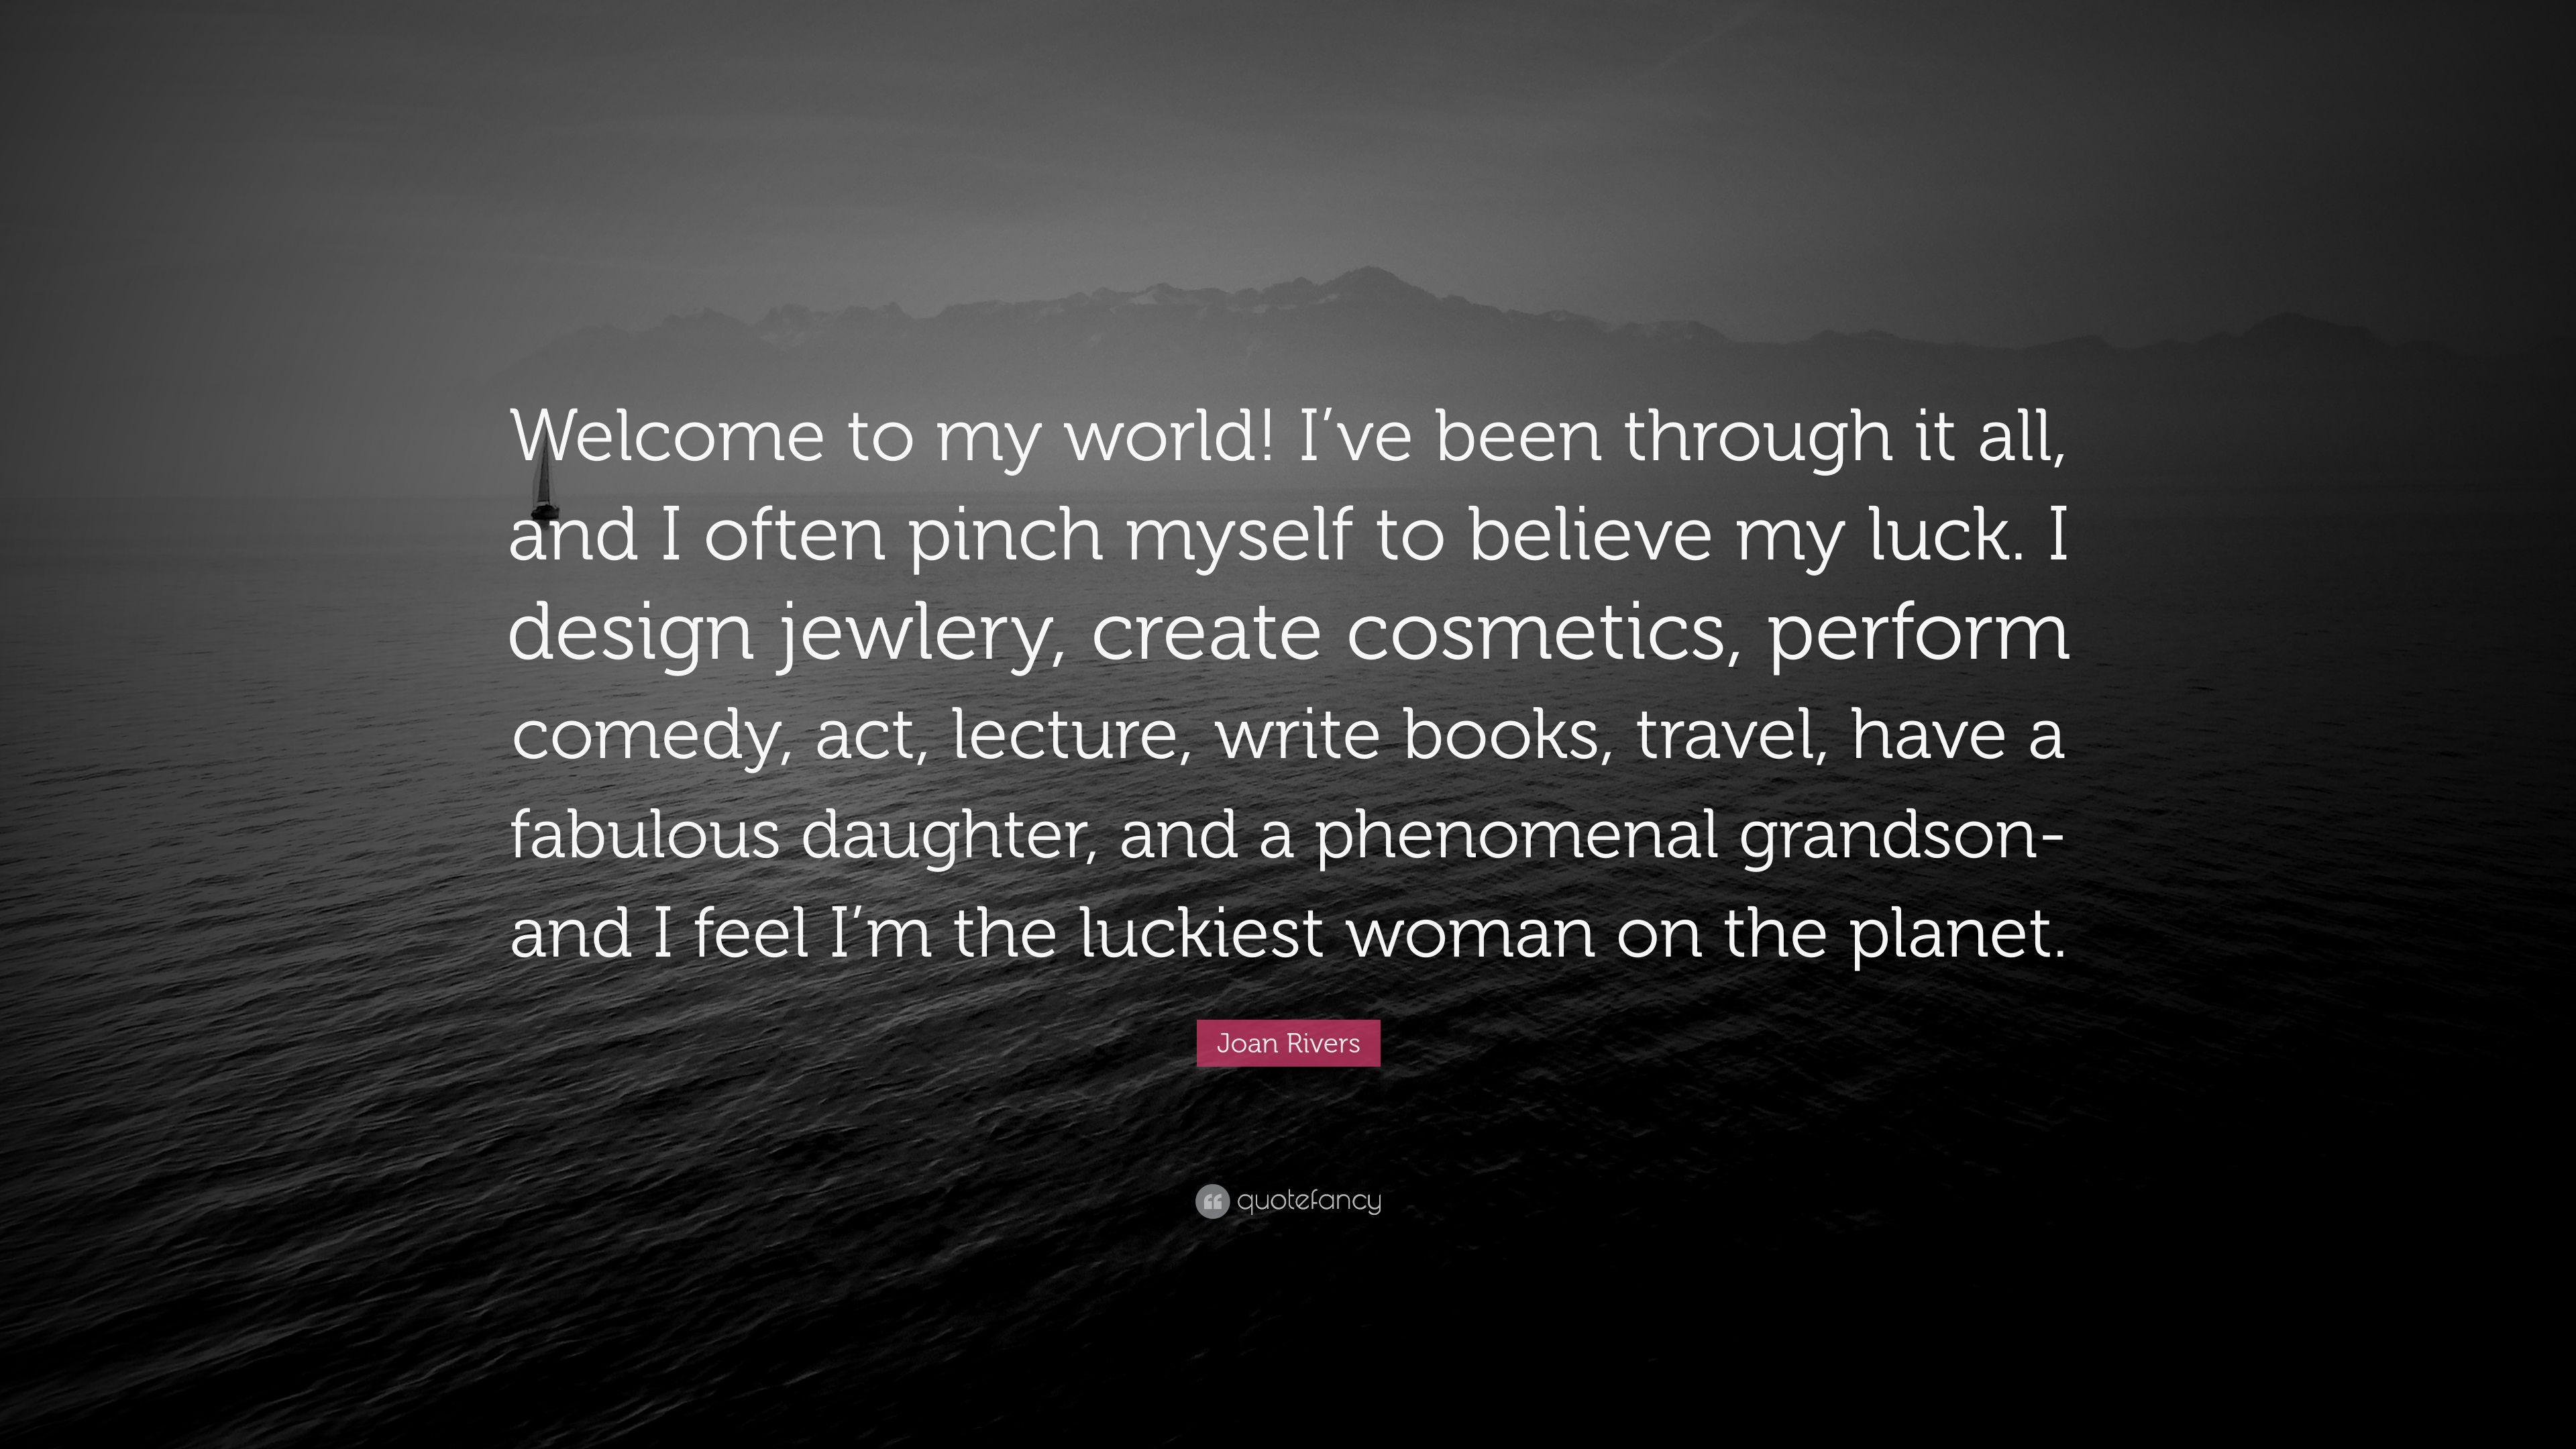 Joan Rivers Quote: “Welcome to my world! I've been through it all